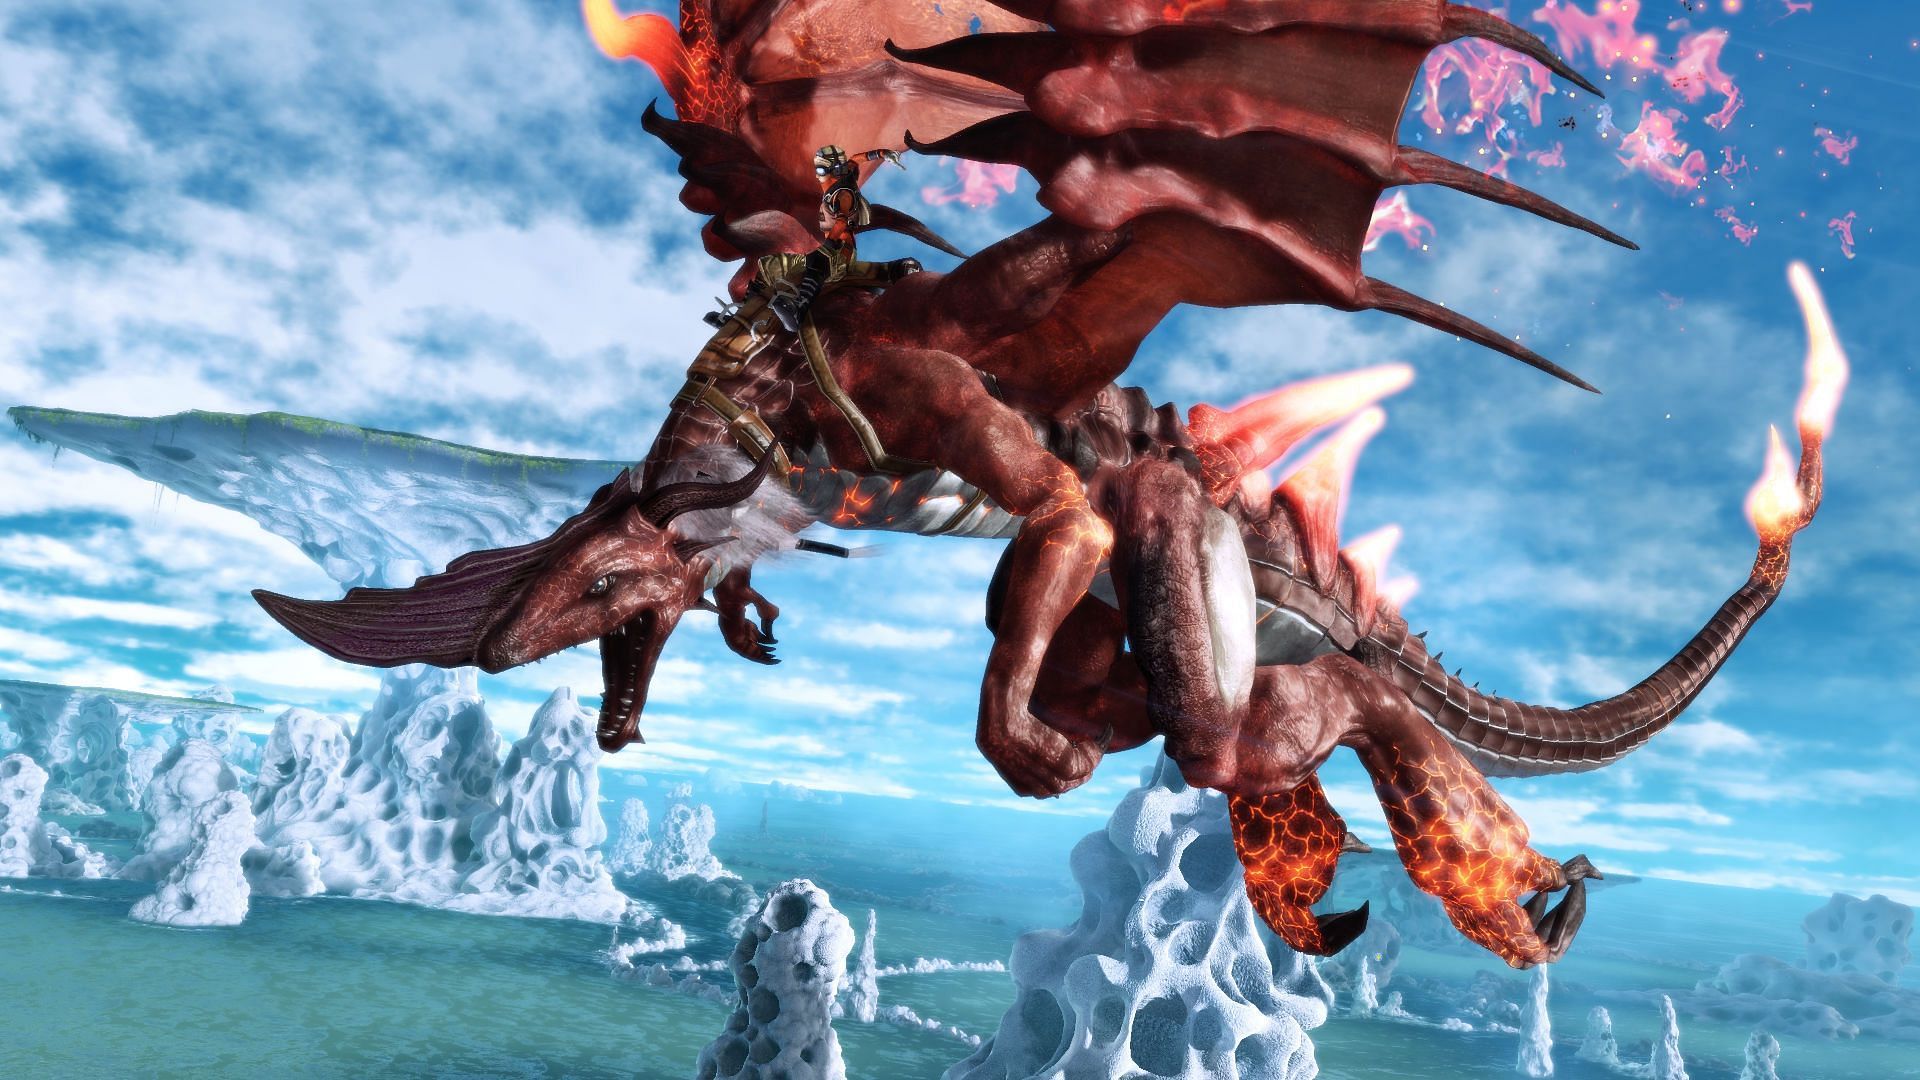 Crimson Dragon should have never been a launch title for Xbox One (image via Xbox, Xbox Game Studios)